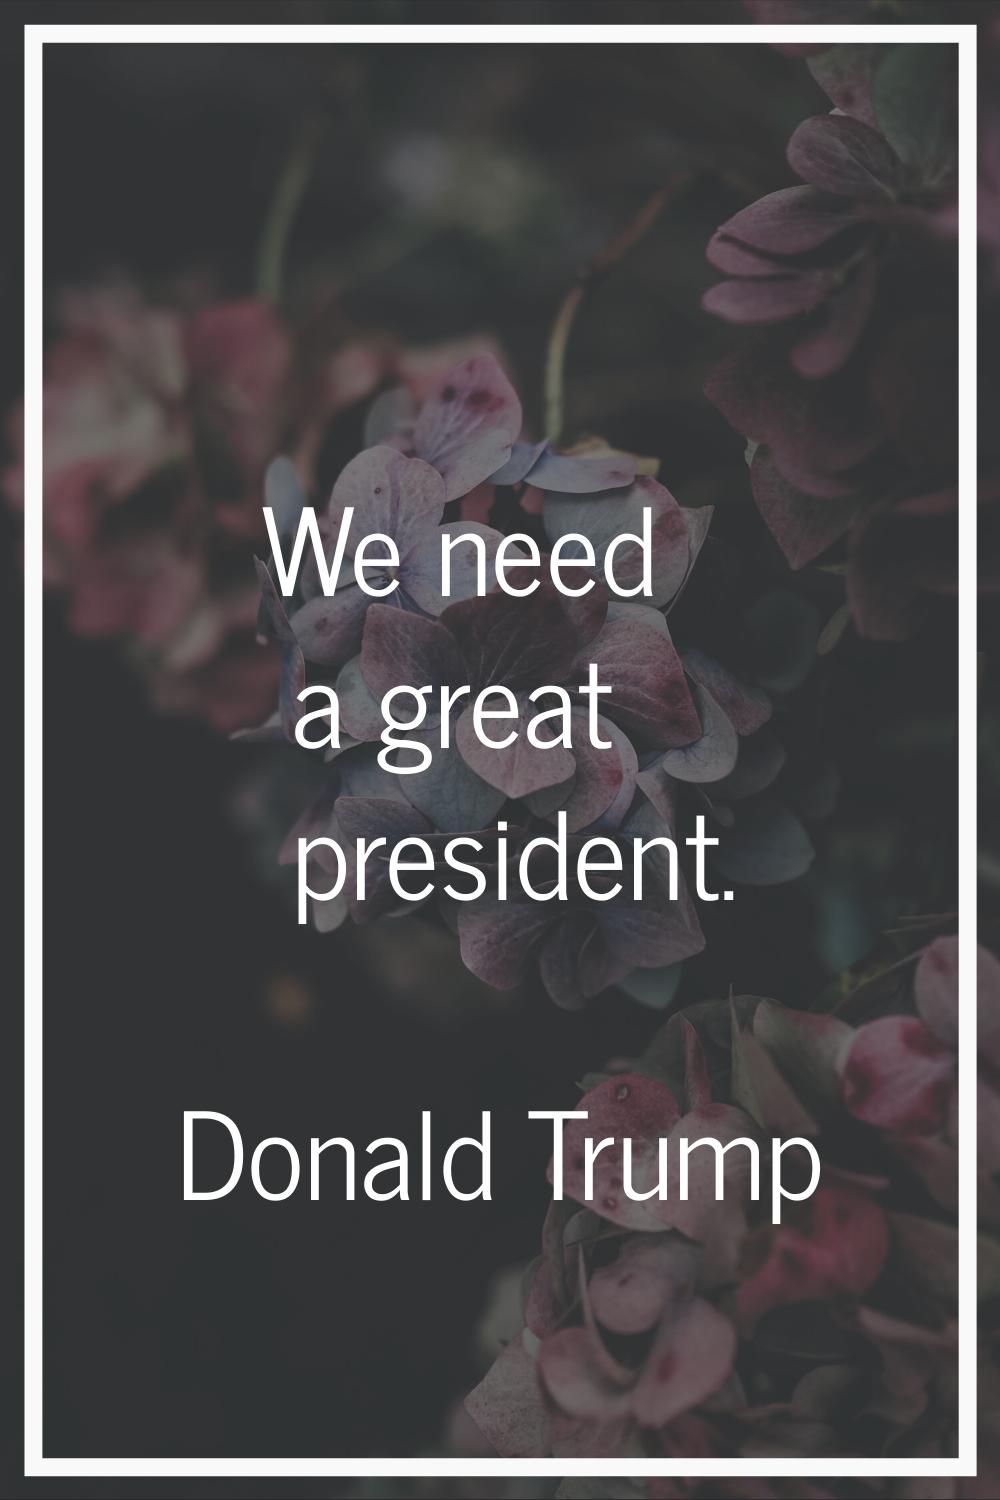 We need a great president.